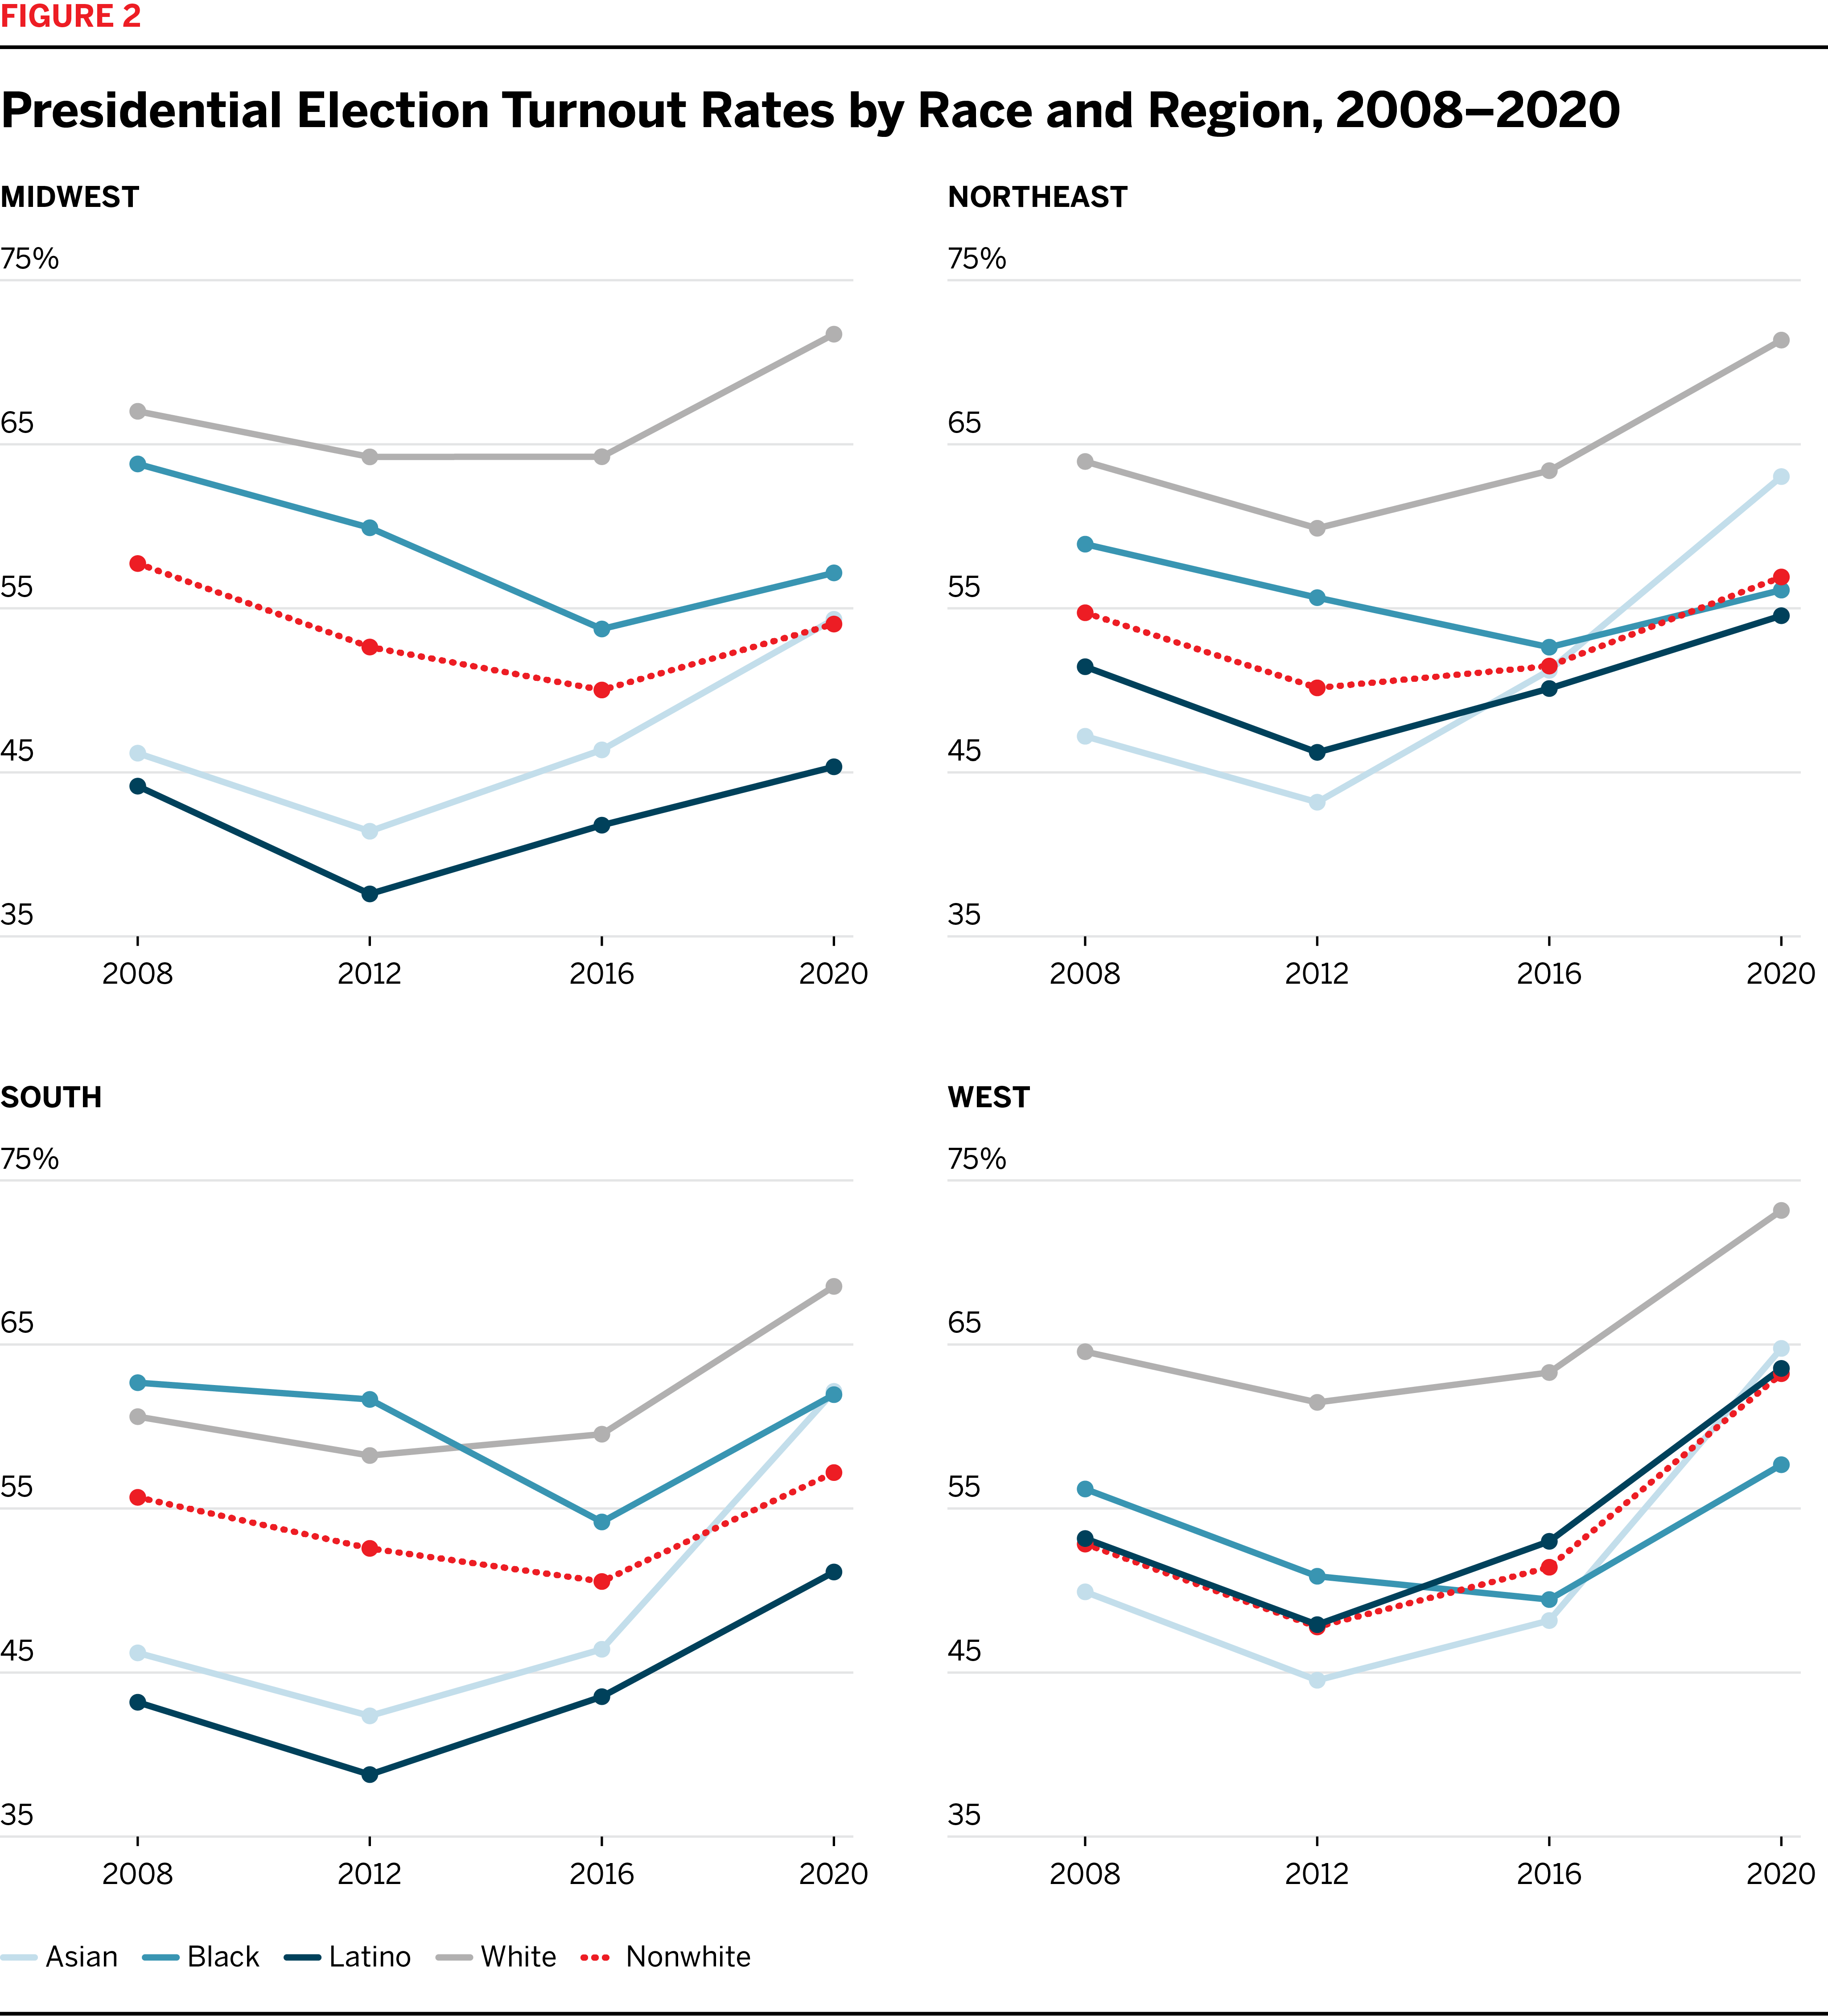 Presidential Election Turnout Rates by Race and Region, 2008-2020 line graphs